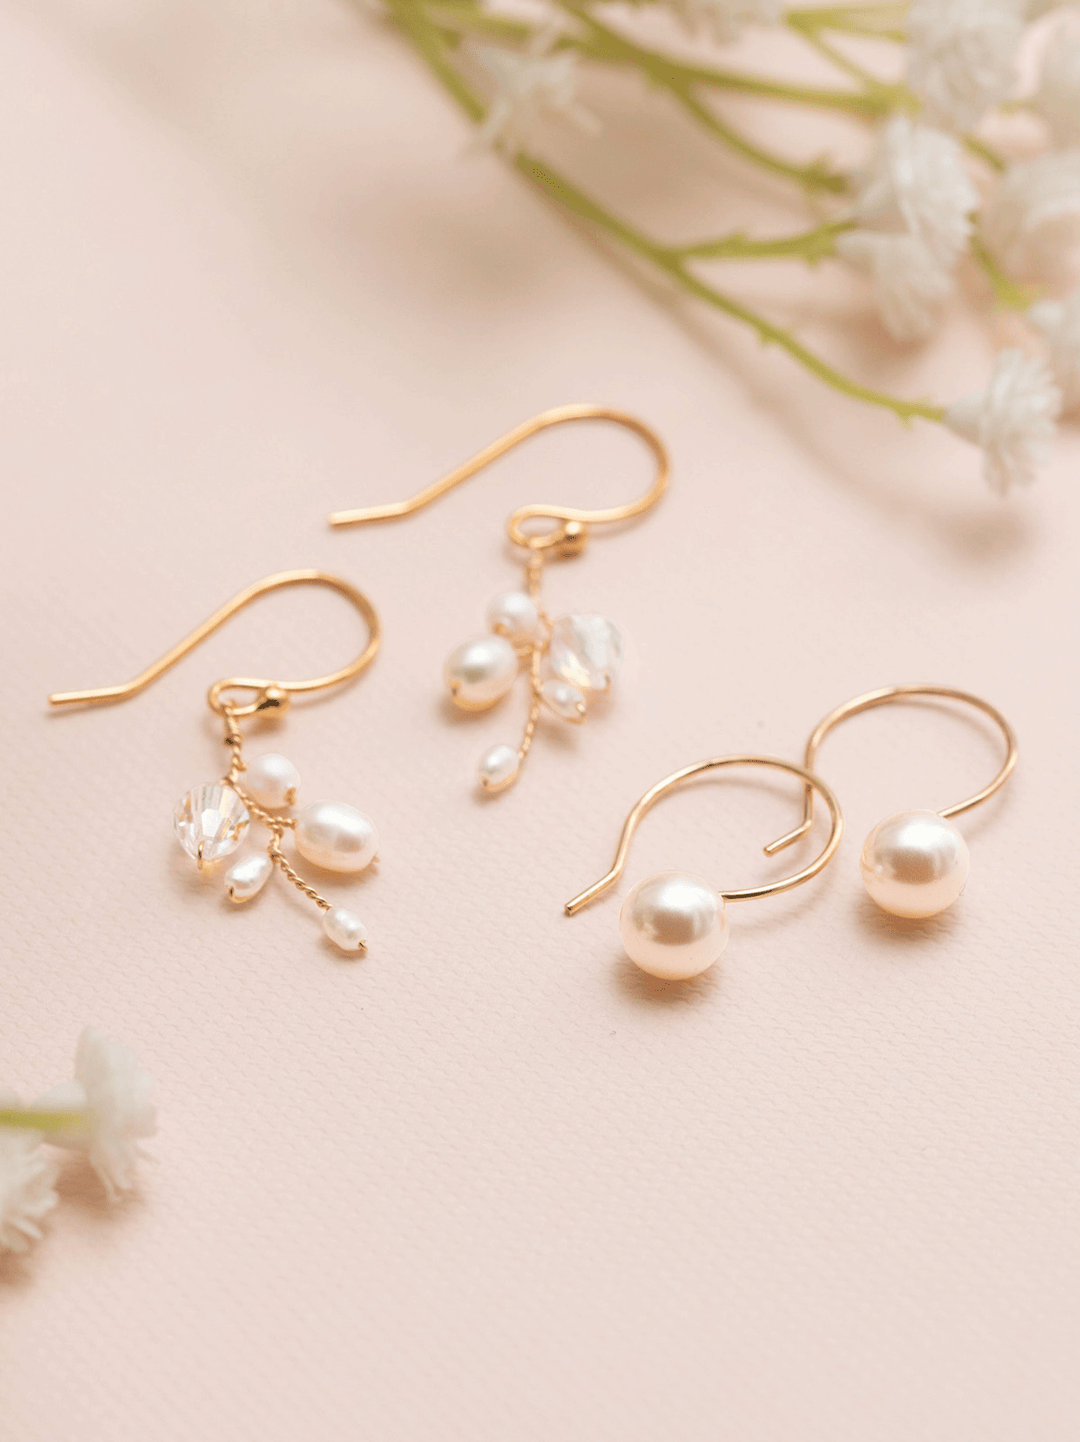 The Florentina Earrings are a whimsical take on crystals & pearls ...